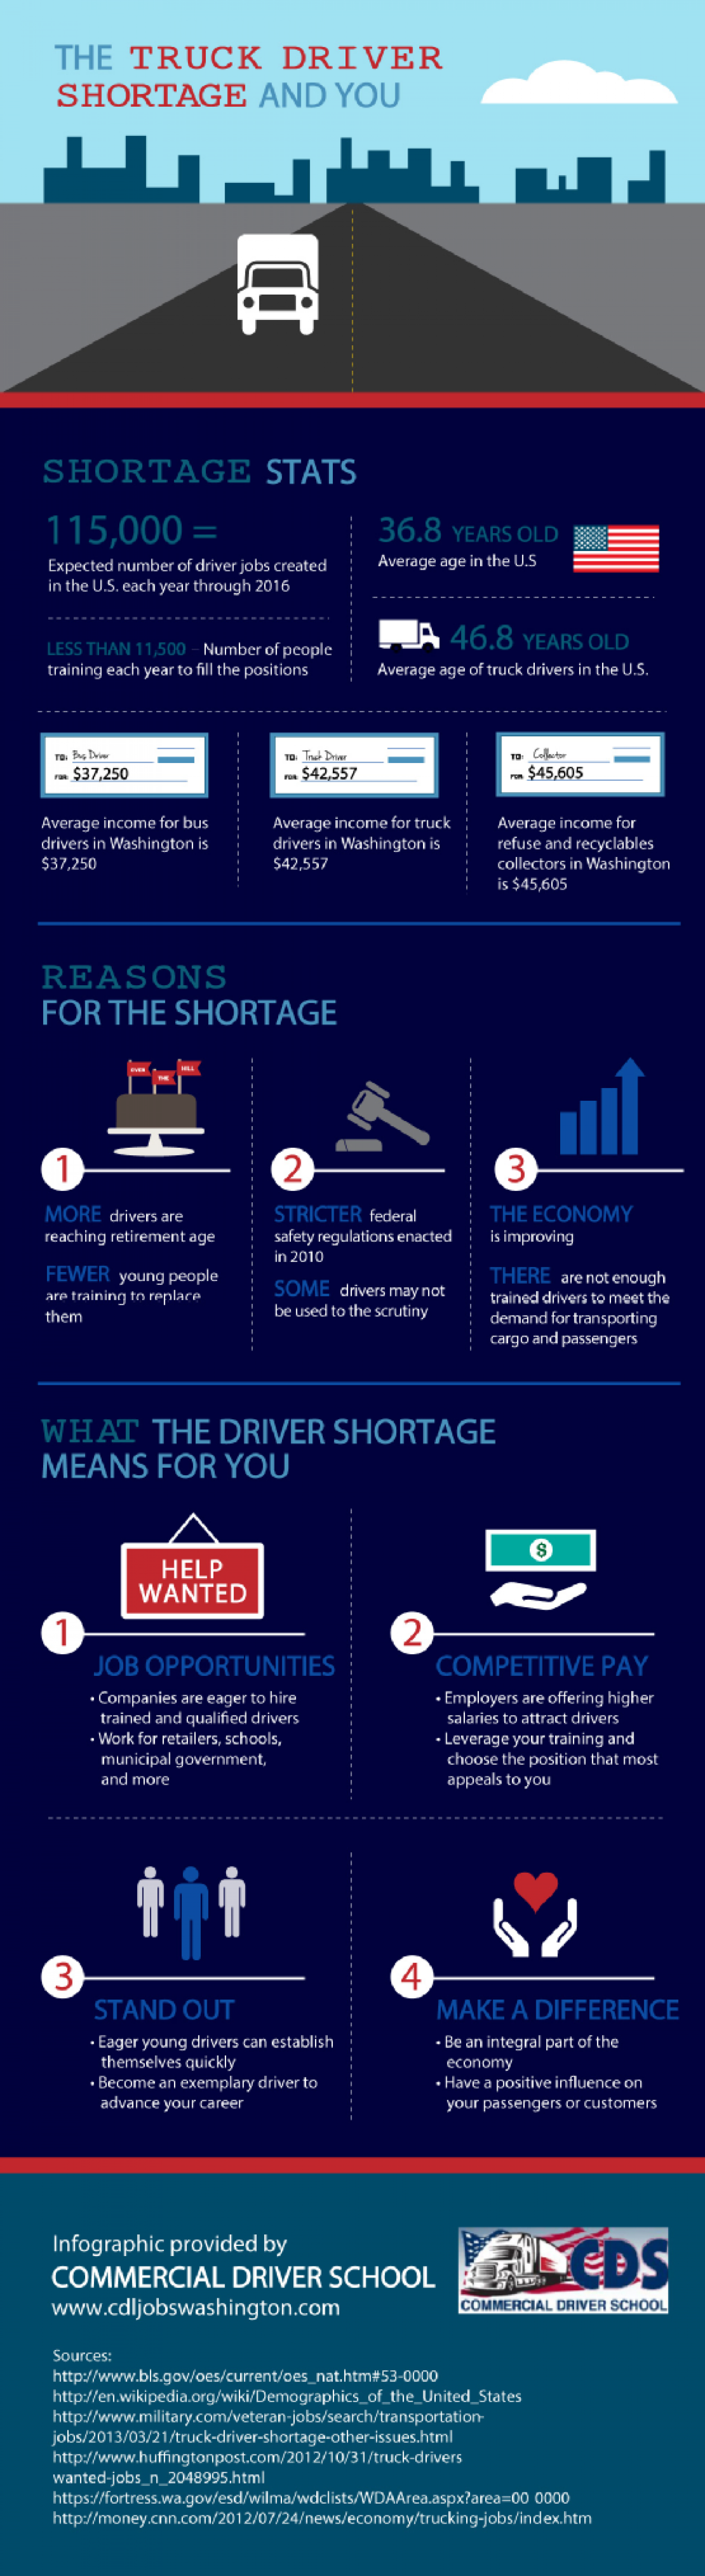 The Truck Driver Shortage and You Infographic